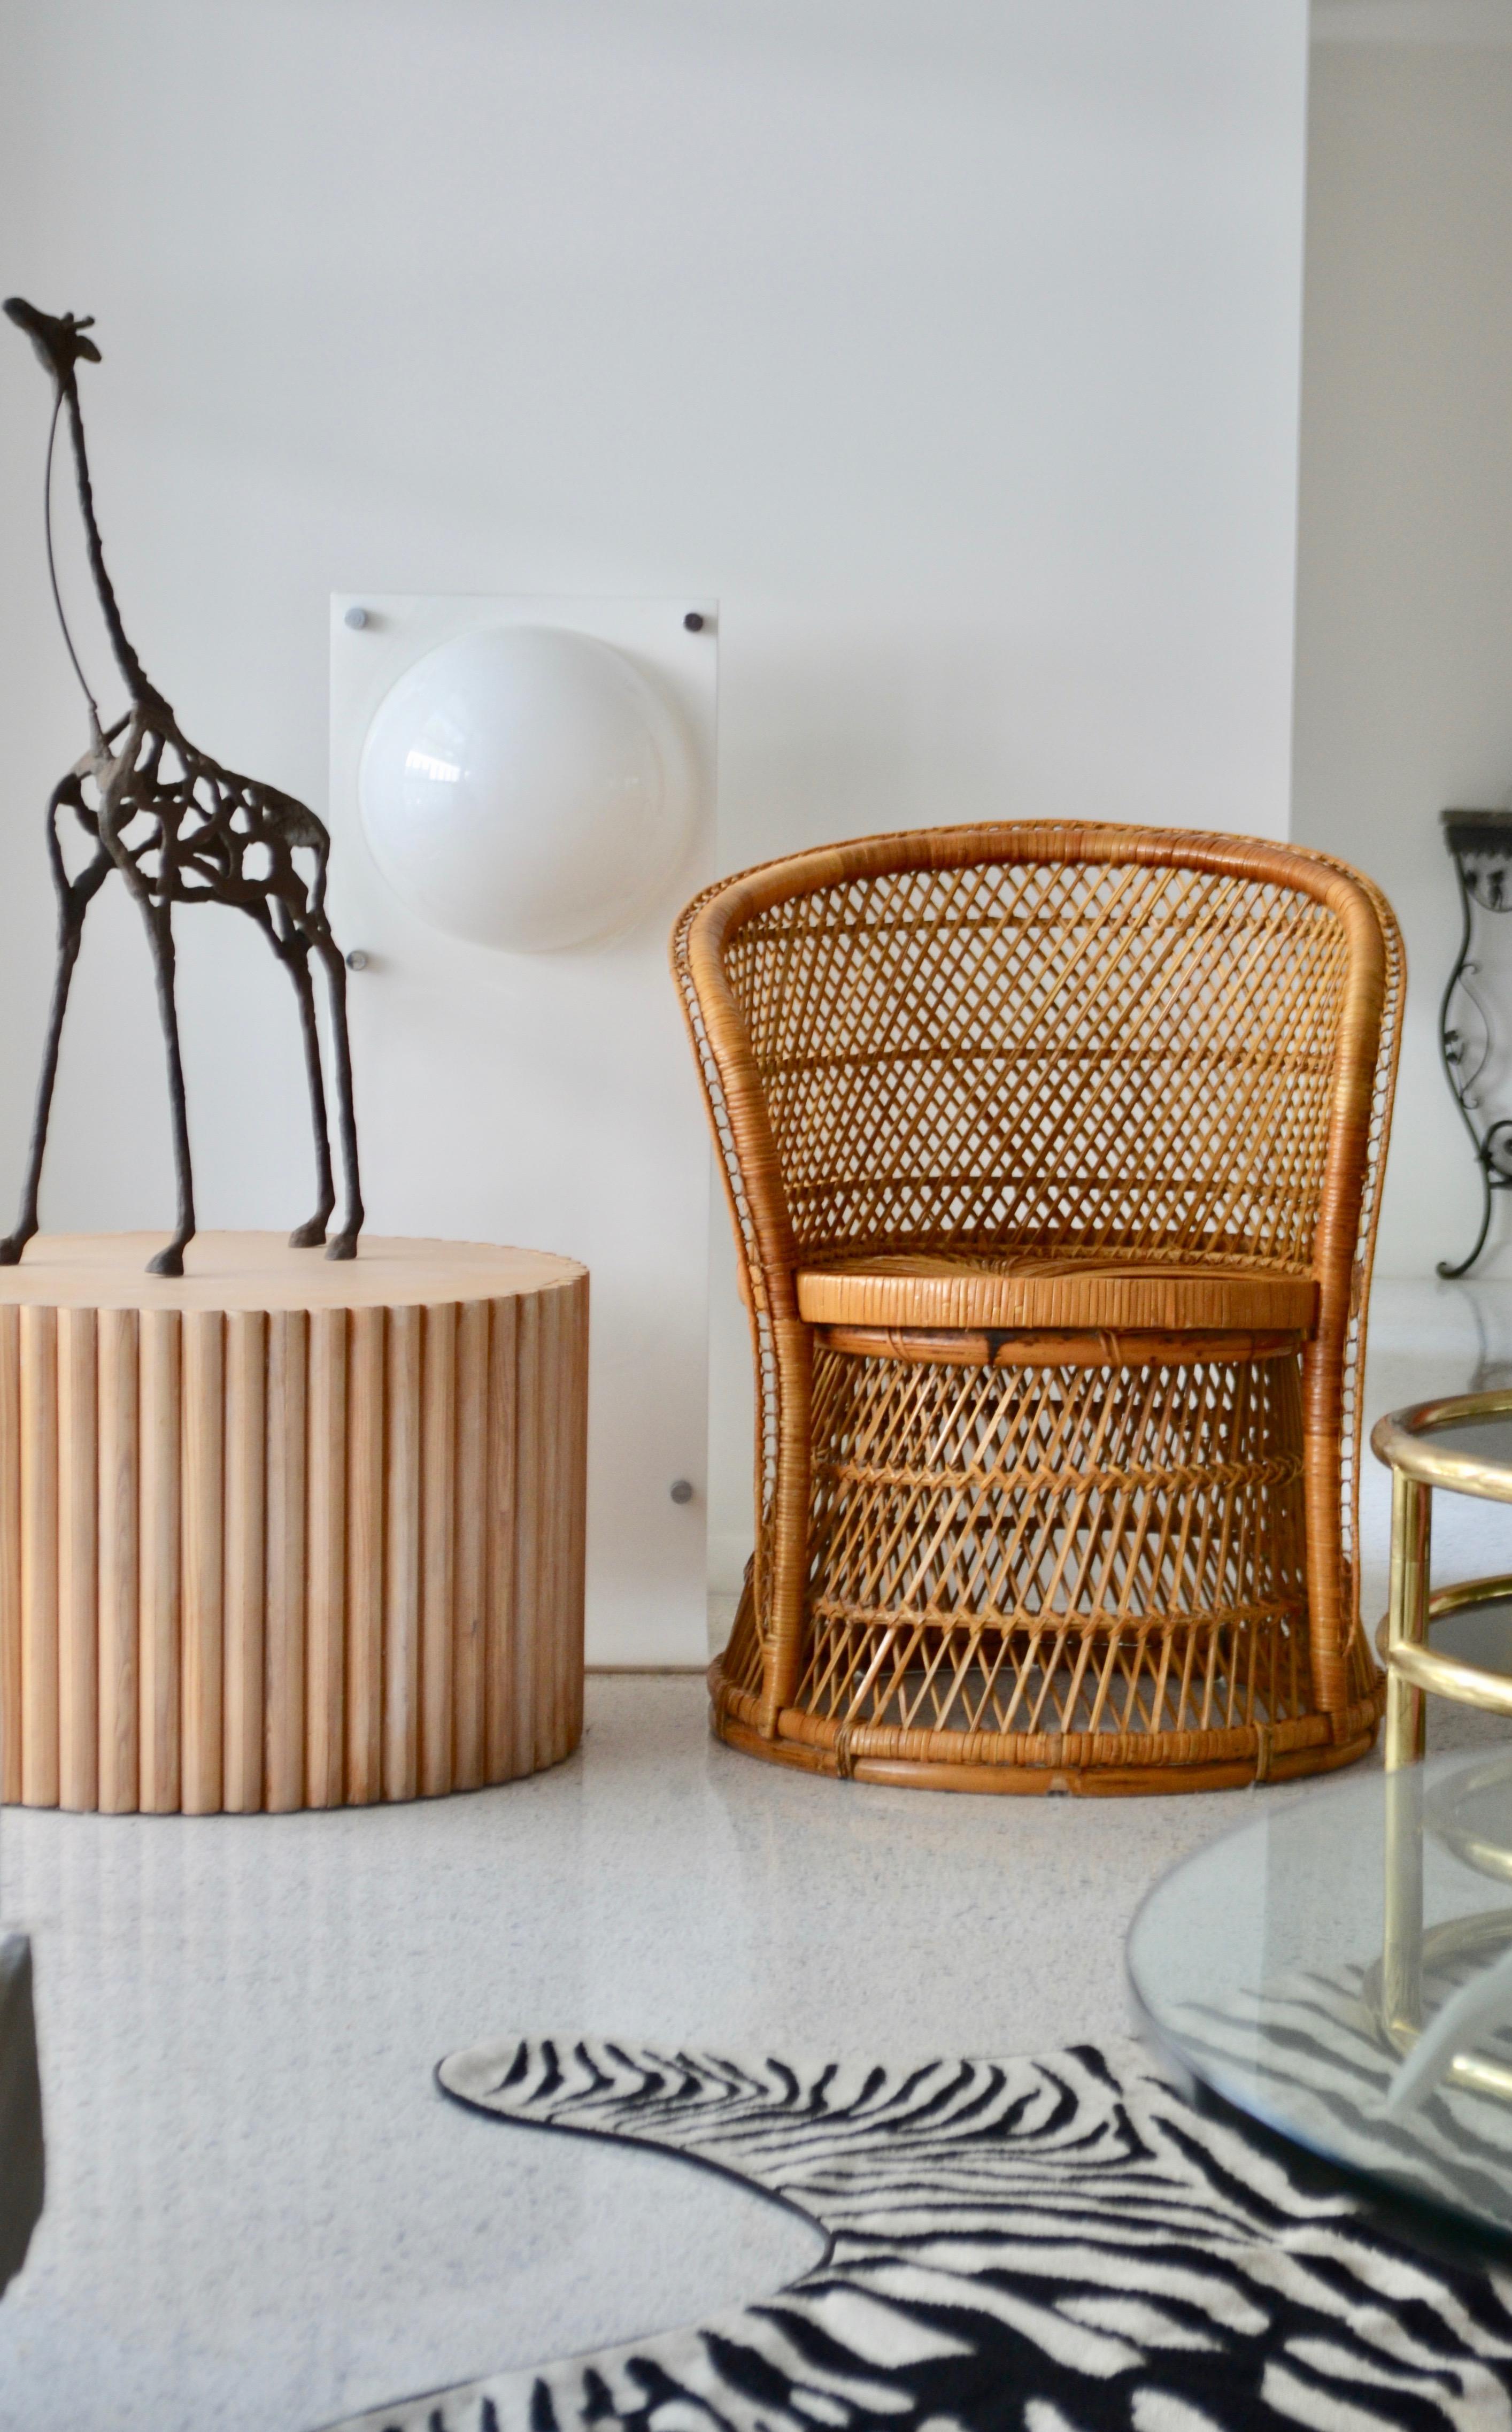 Striking midcentury woven rattan tub chair, circa 1960s. This sculptural occasional chair or side chair is designed with intricately webbed rattan and open weave seat and back.